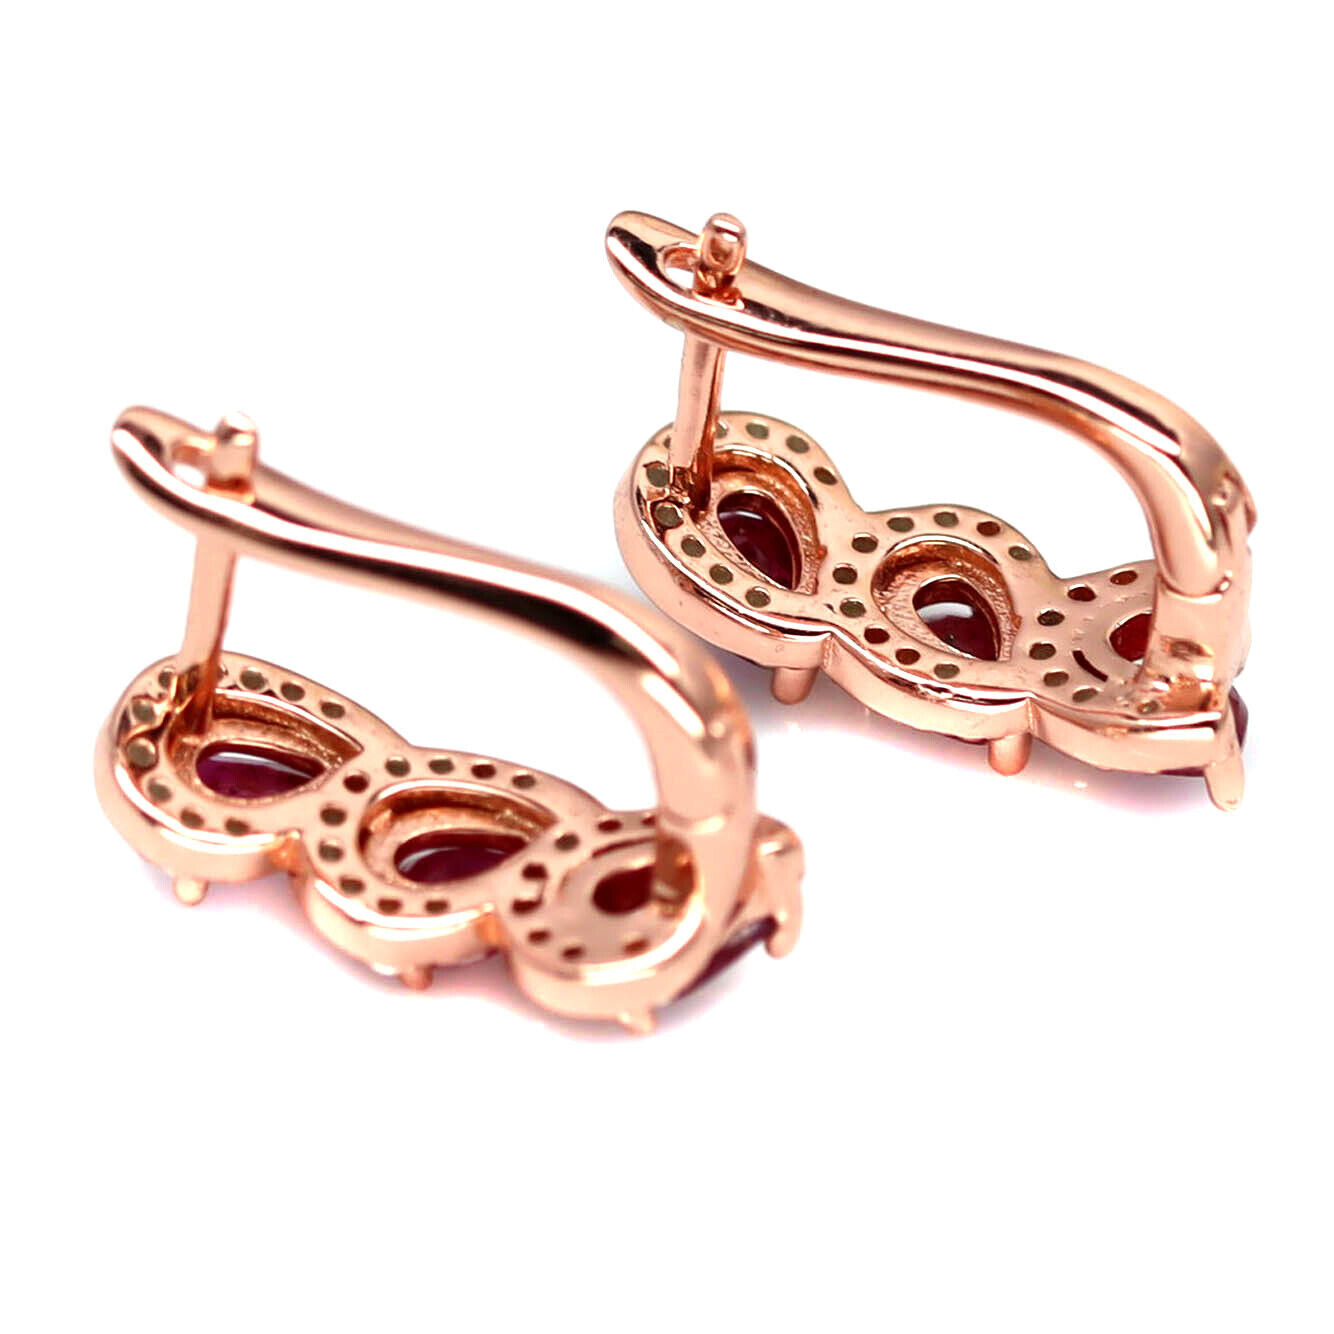 A pair of rose gold on 925 silver earrings set with three oval cut rubies and white stones, L. 1. - Image 2 of 2